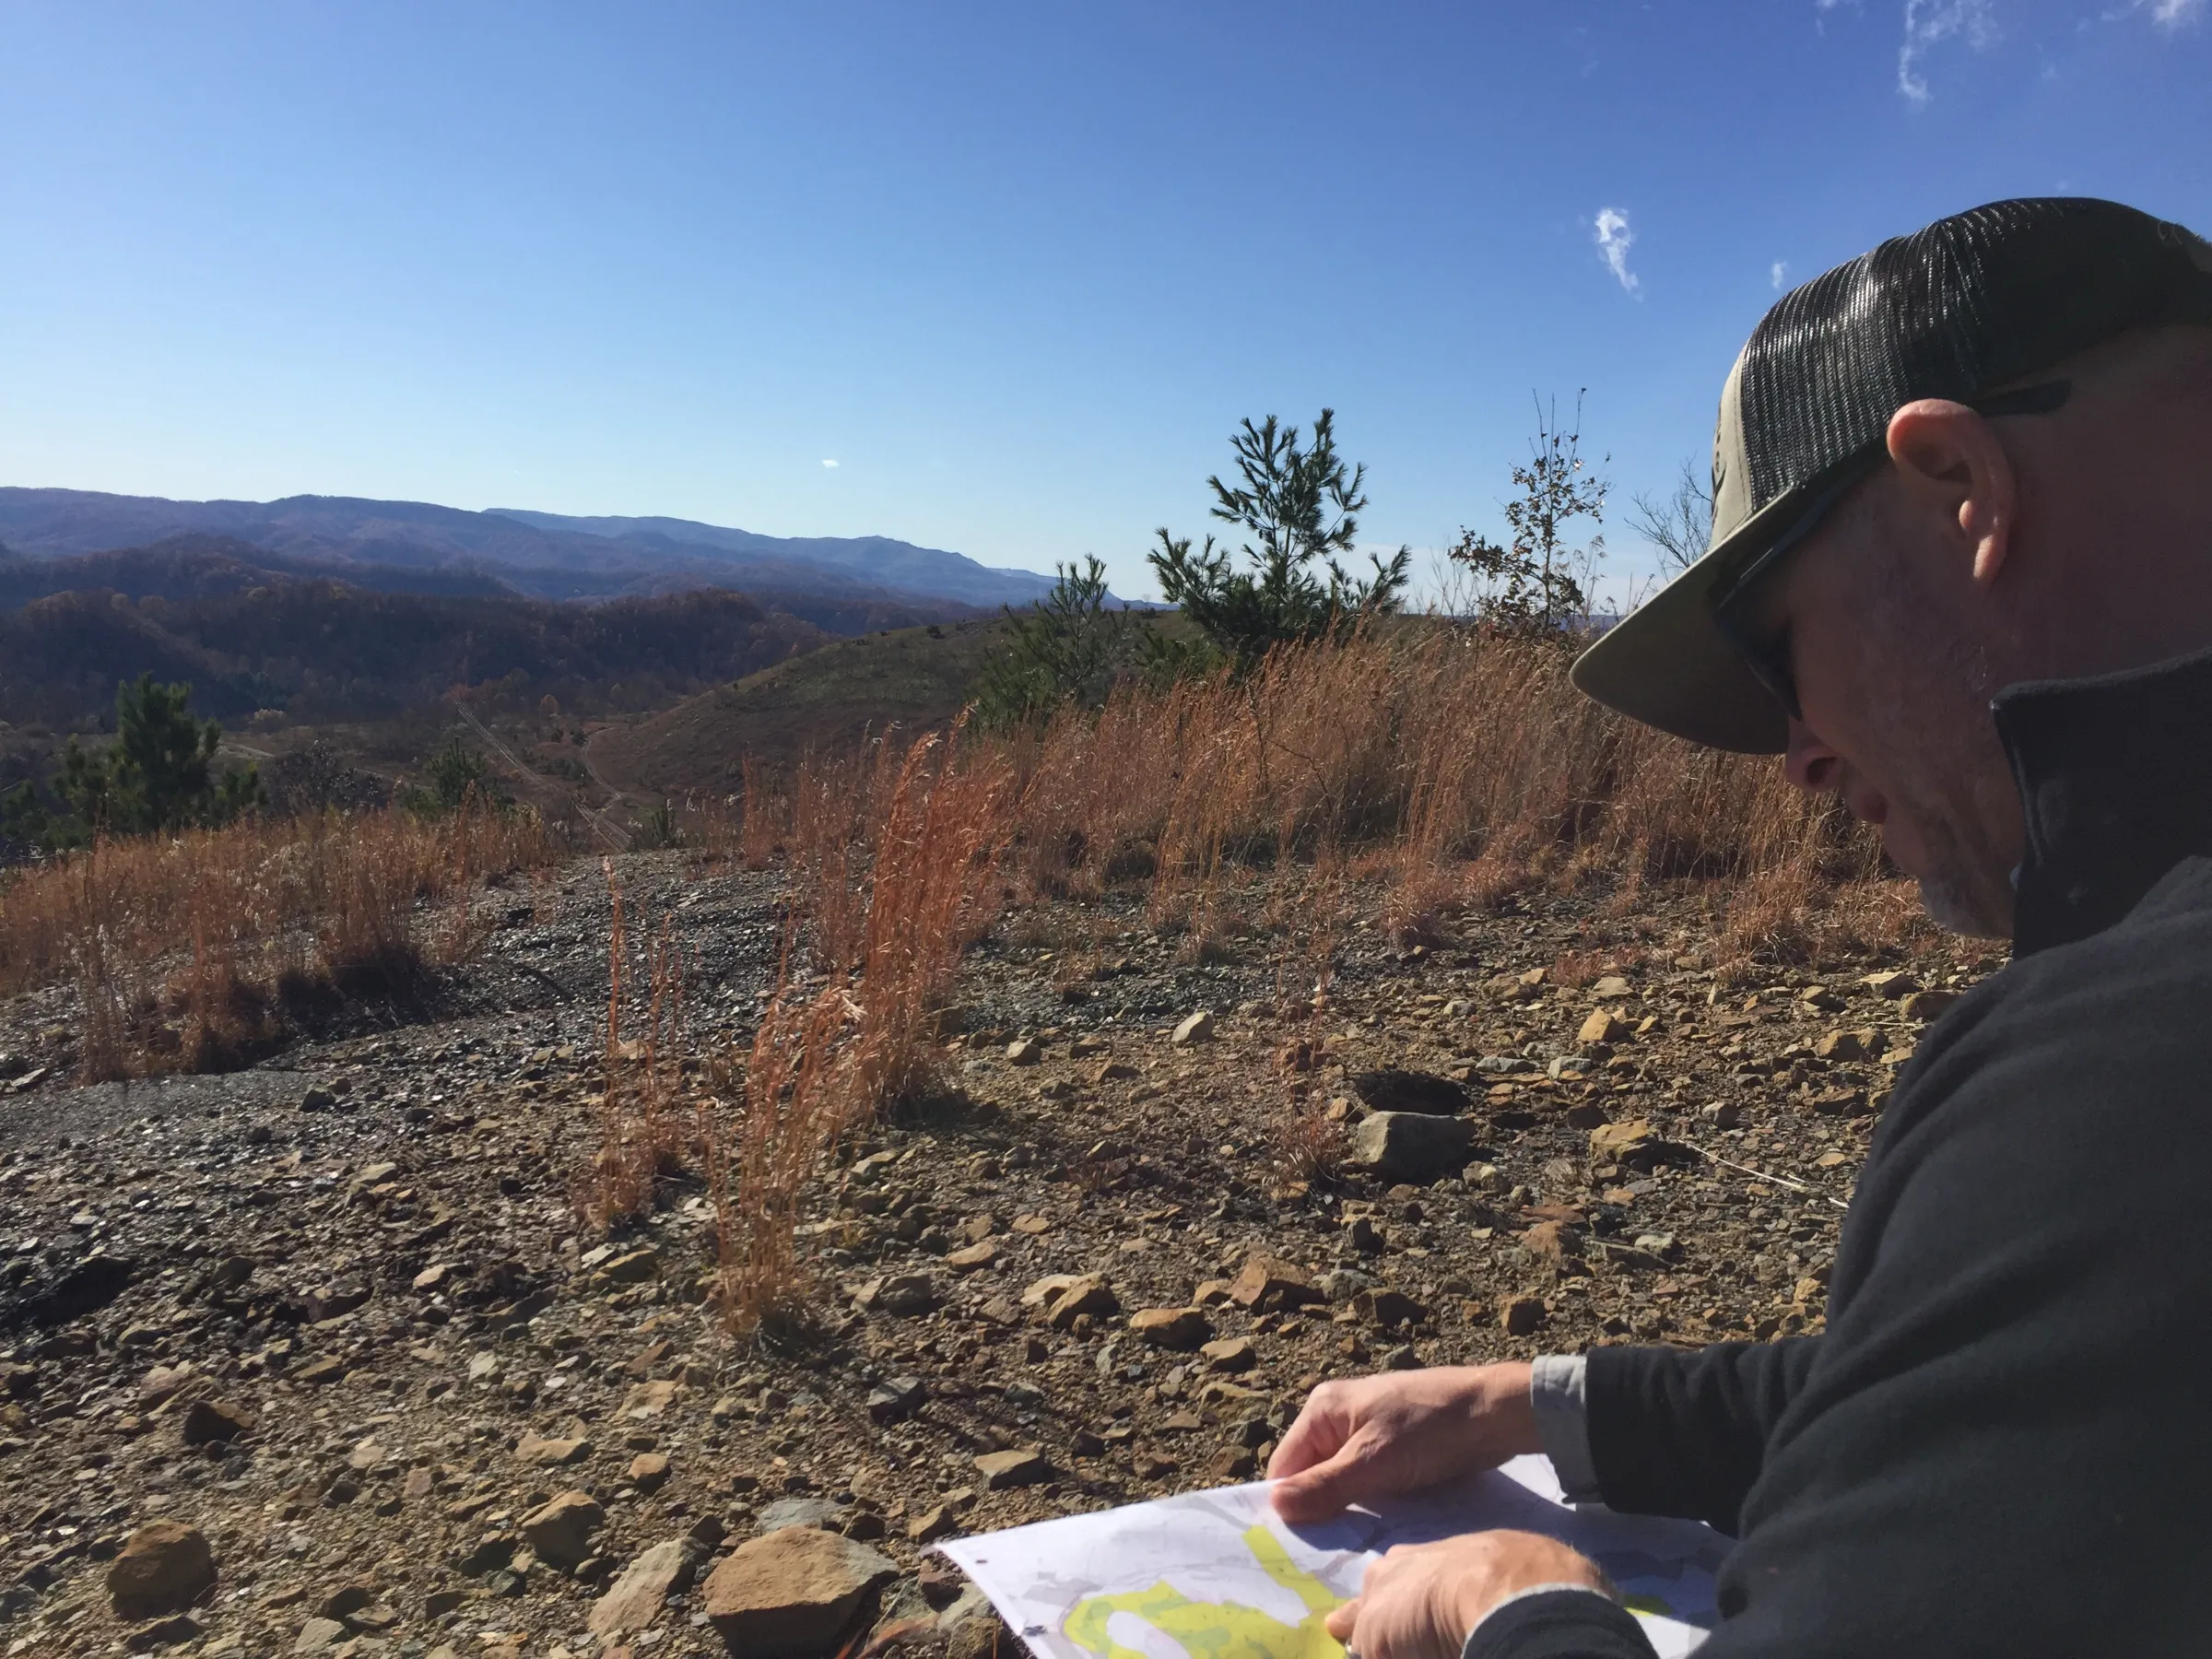 A man looks at a map sat on rocky ground